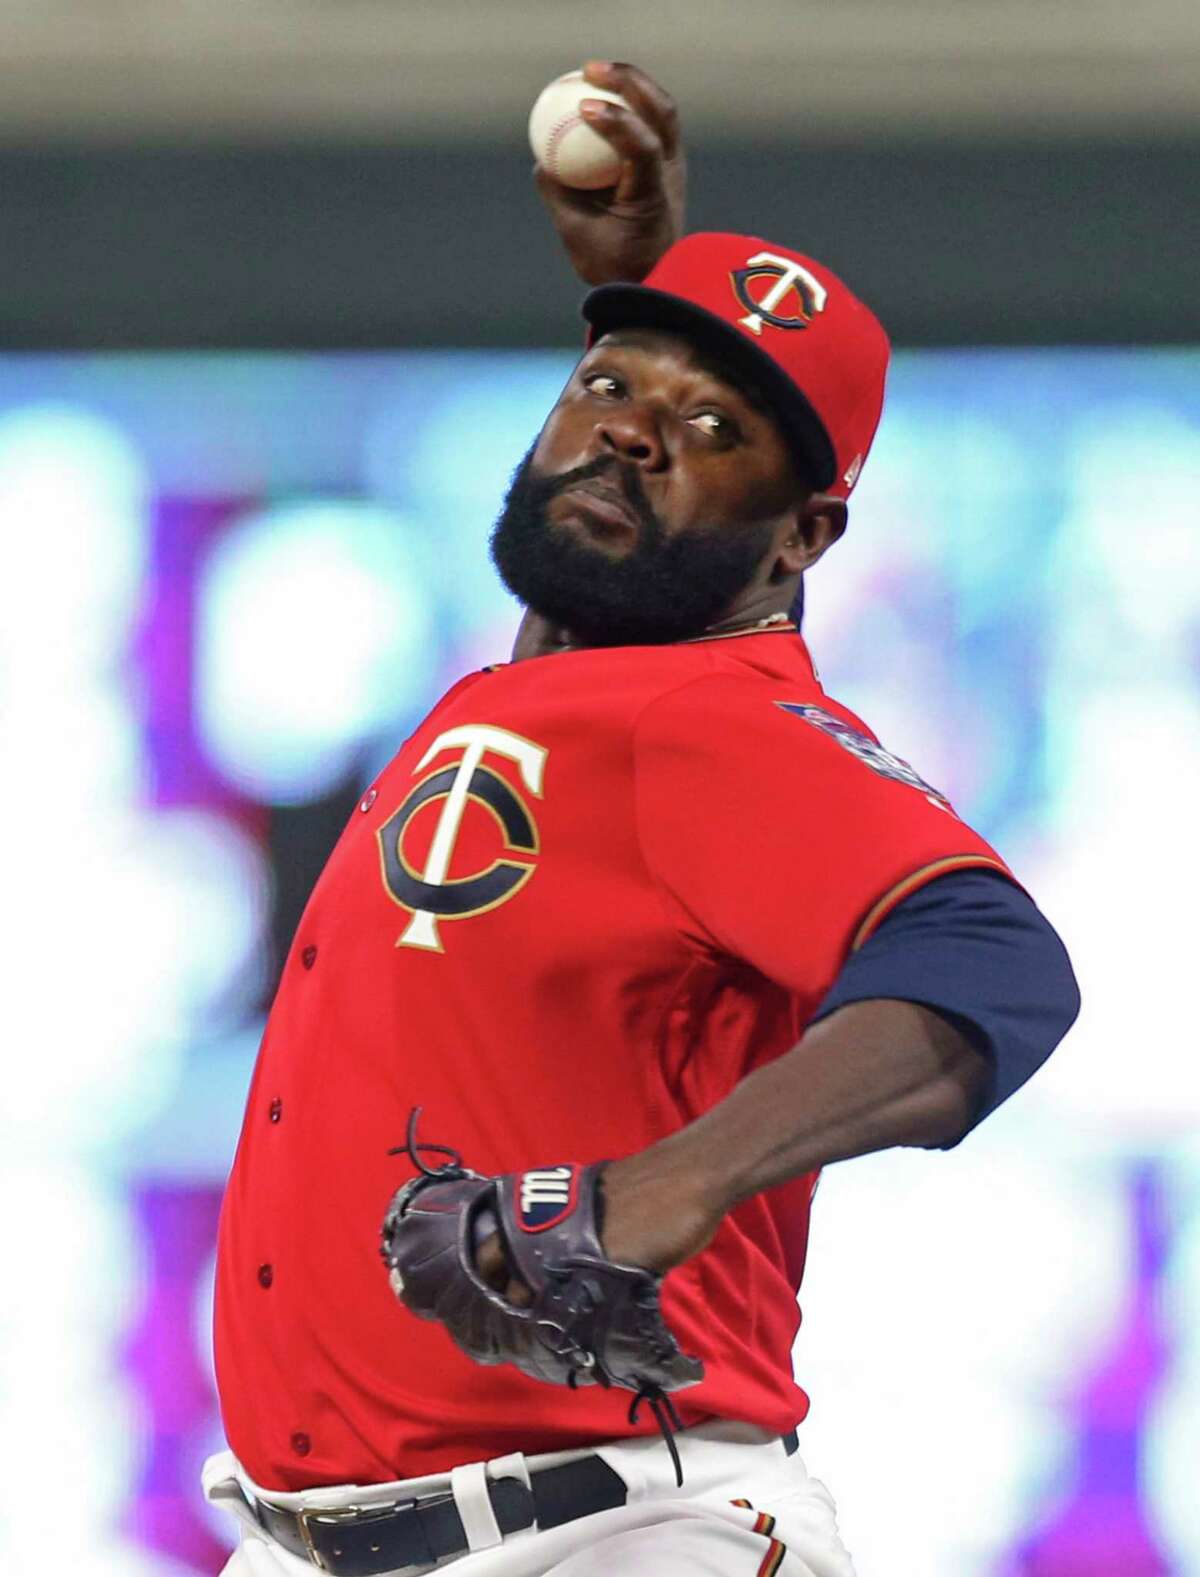 Minnesota Twins pitcher Fernando Rodney throws during the ninth inning of the team's baseball game against the Houston Astros on Tuesday, April 10, 2018, in Minneapolis. The Twins won 4-1. Rodney picked up the save. (AP Photo/Jim Mone)